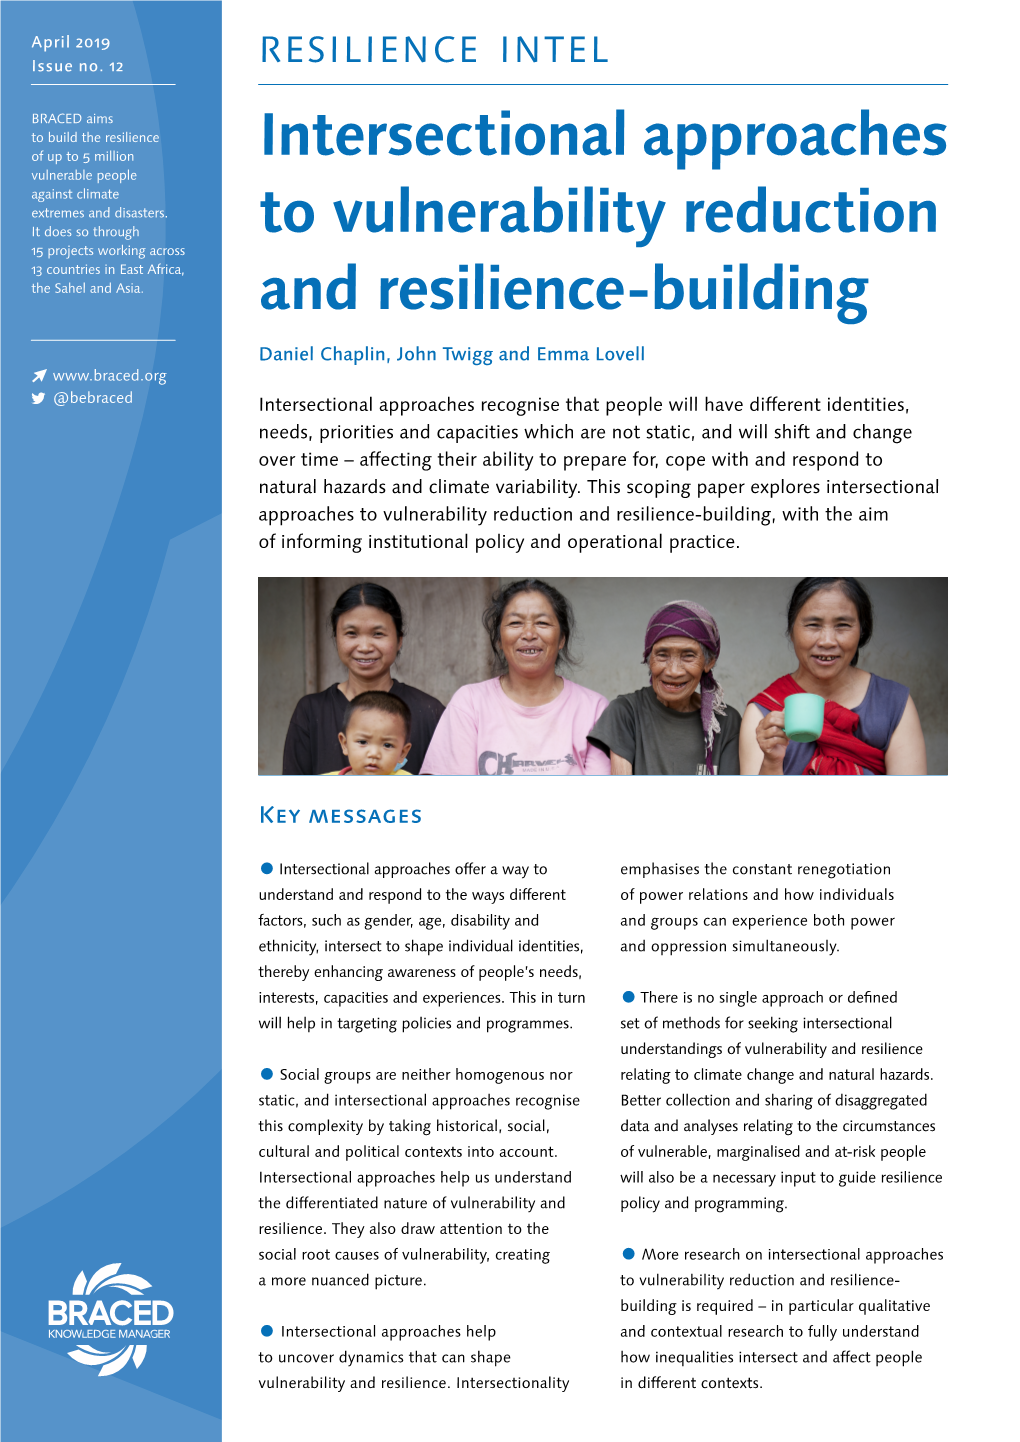 Intersectional Approaches to Vulnerability Reduction and Resilience-Building, with the Aim of Informing Institutional Policy and Operational Practice